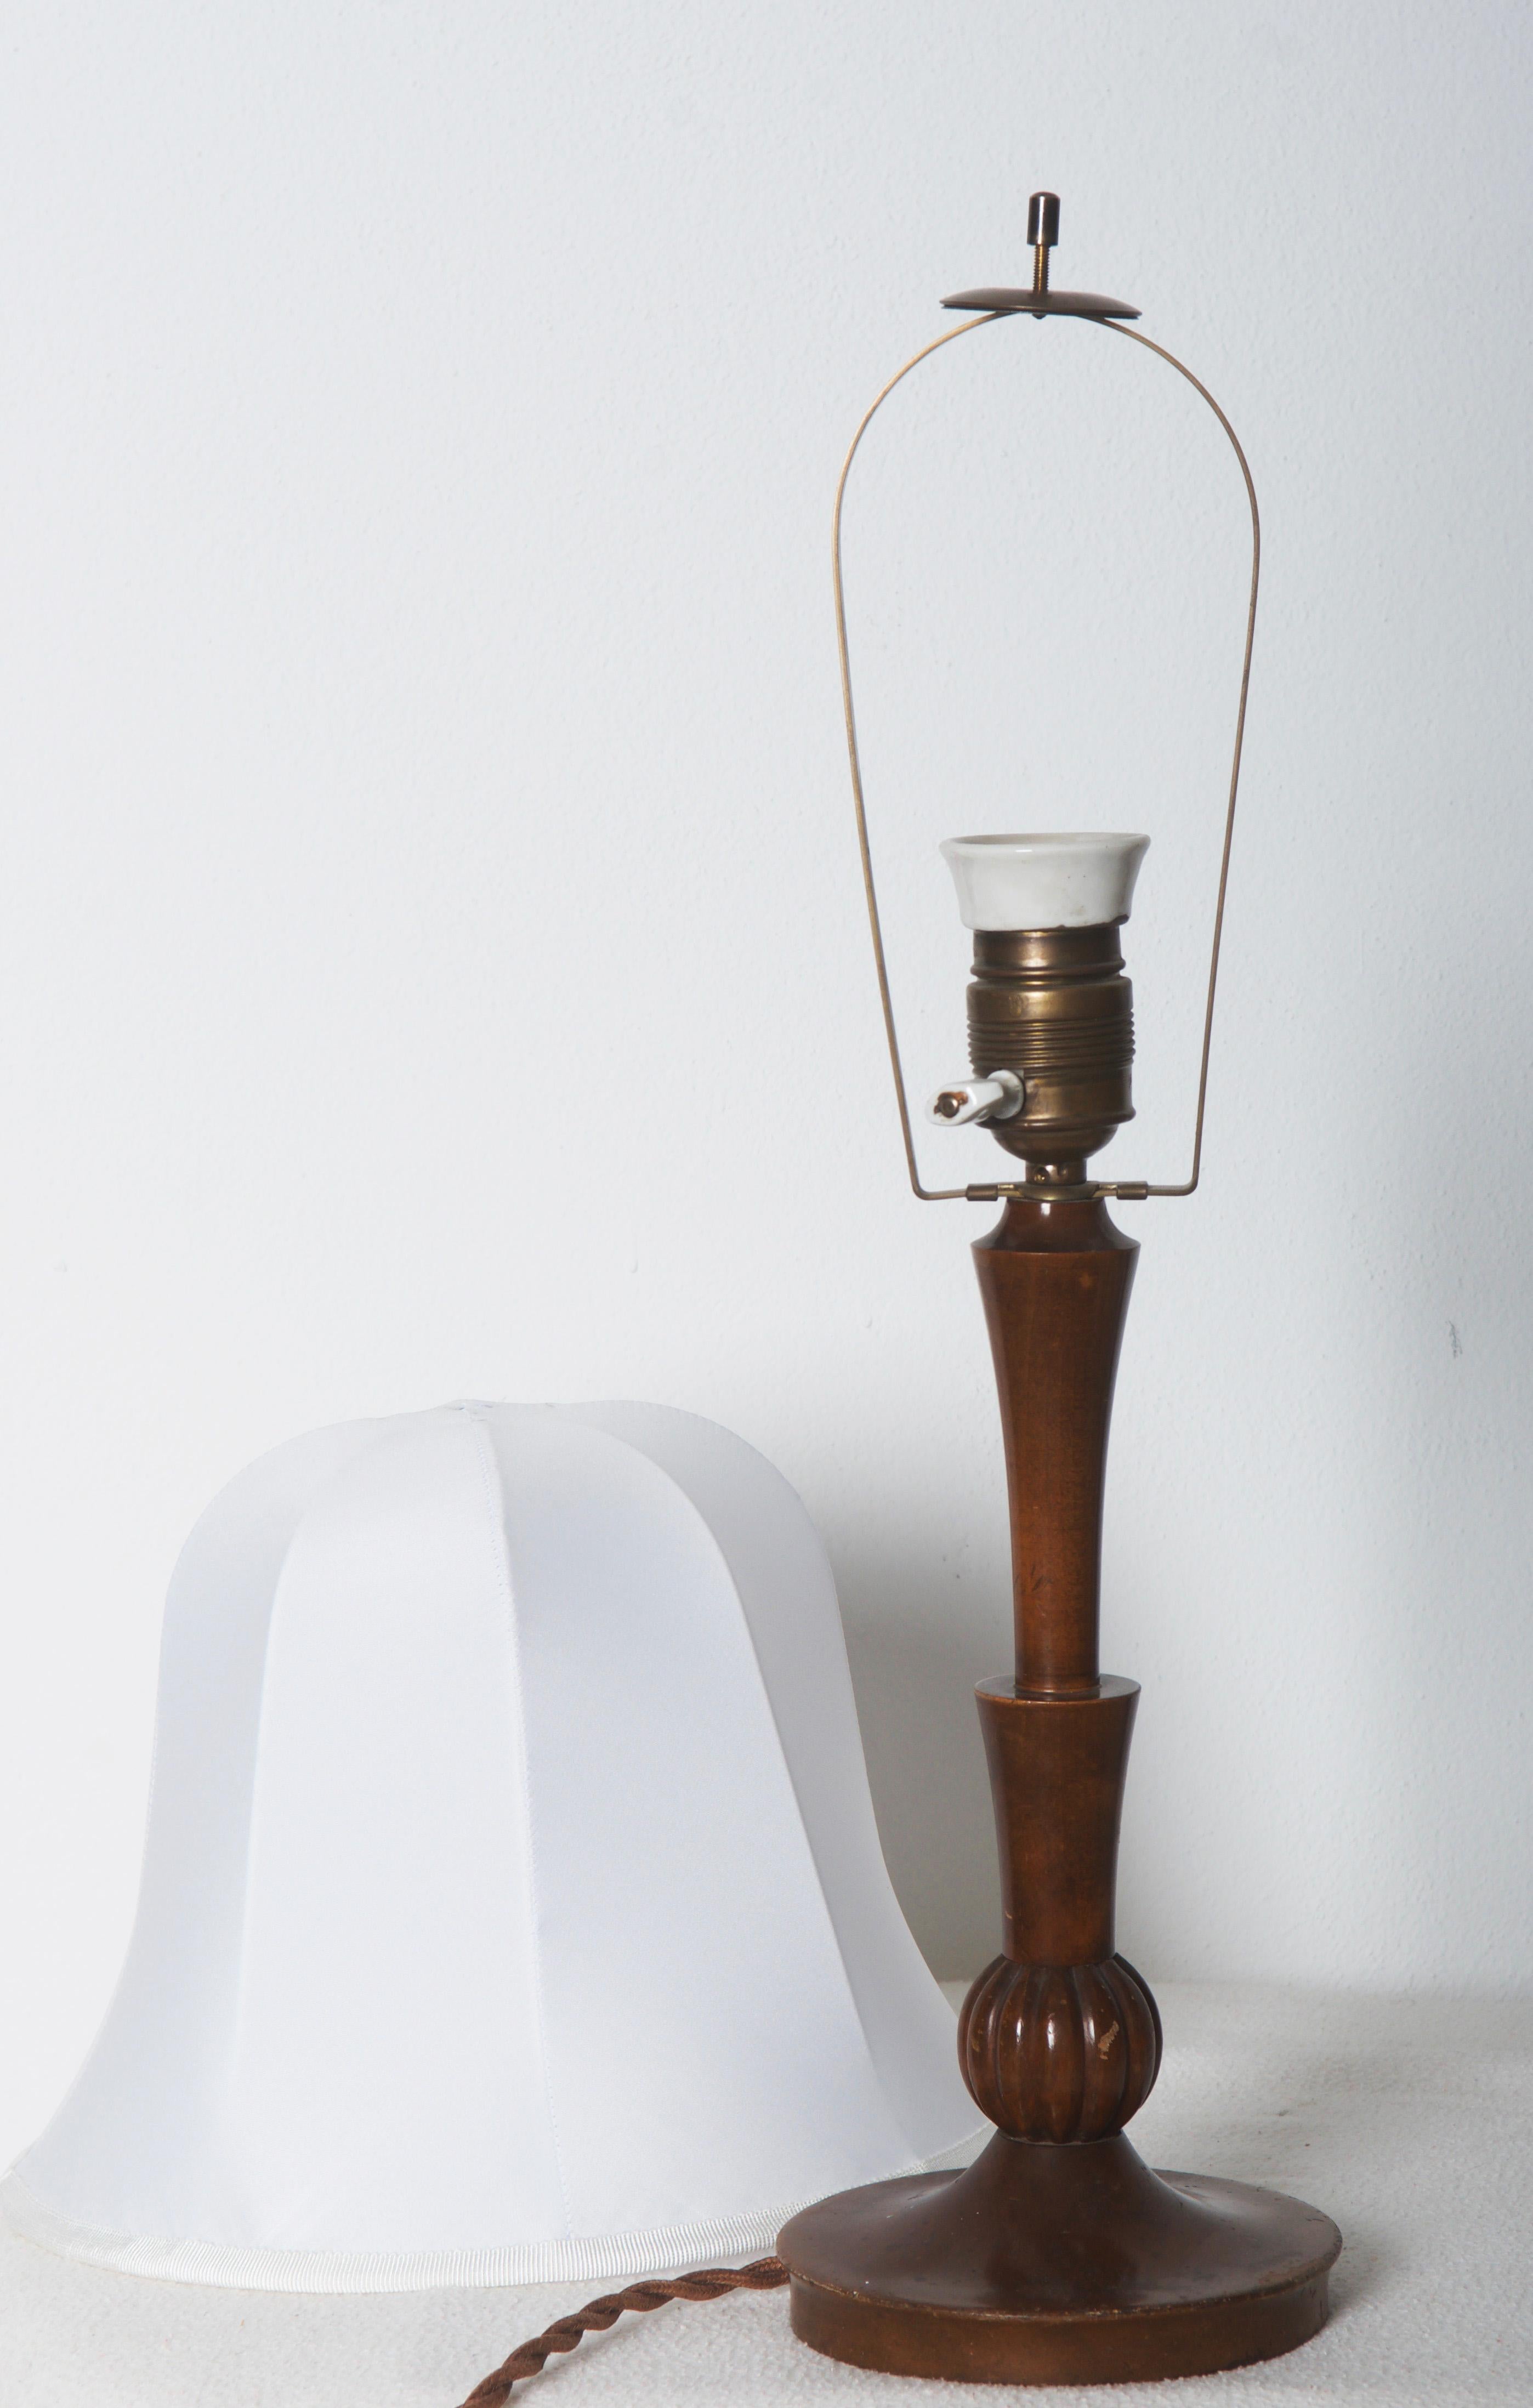 Wooden table lamp in the style of Dagobert Peche made in Austria, circa 1910.
Powered with one porcelain E27 socket, new shade.
 